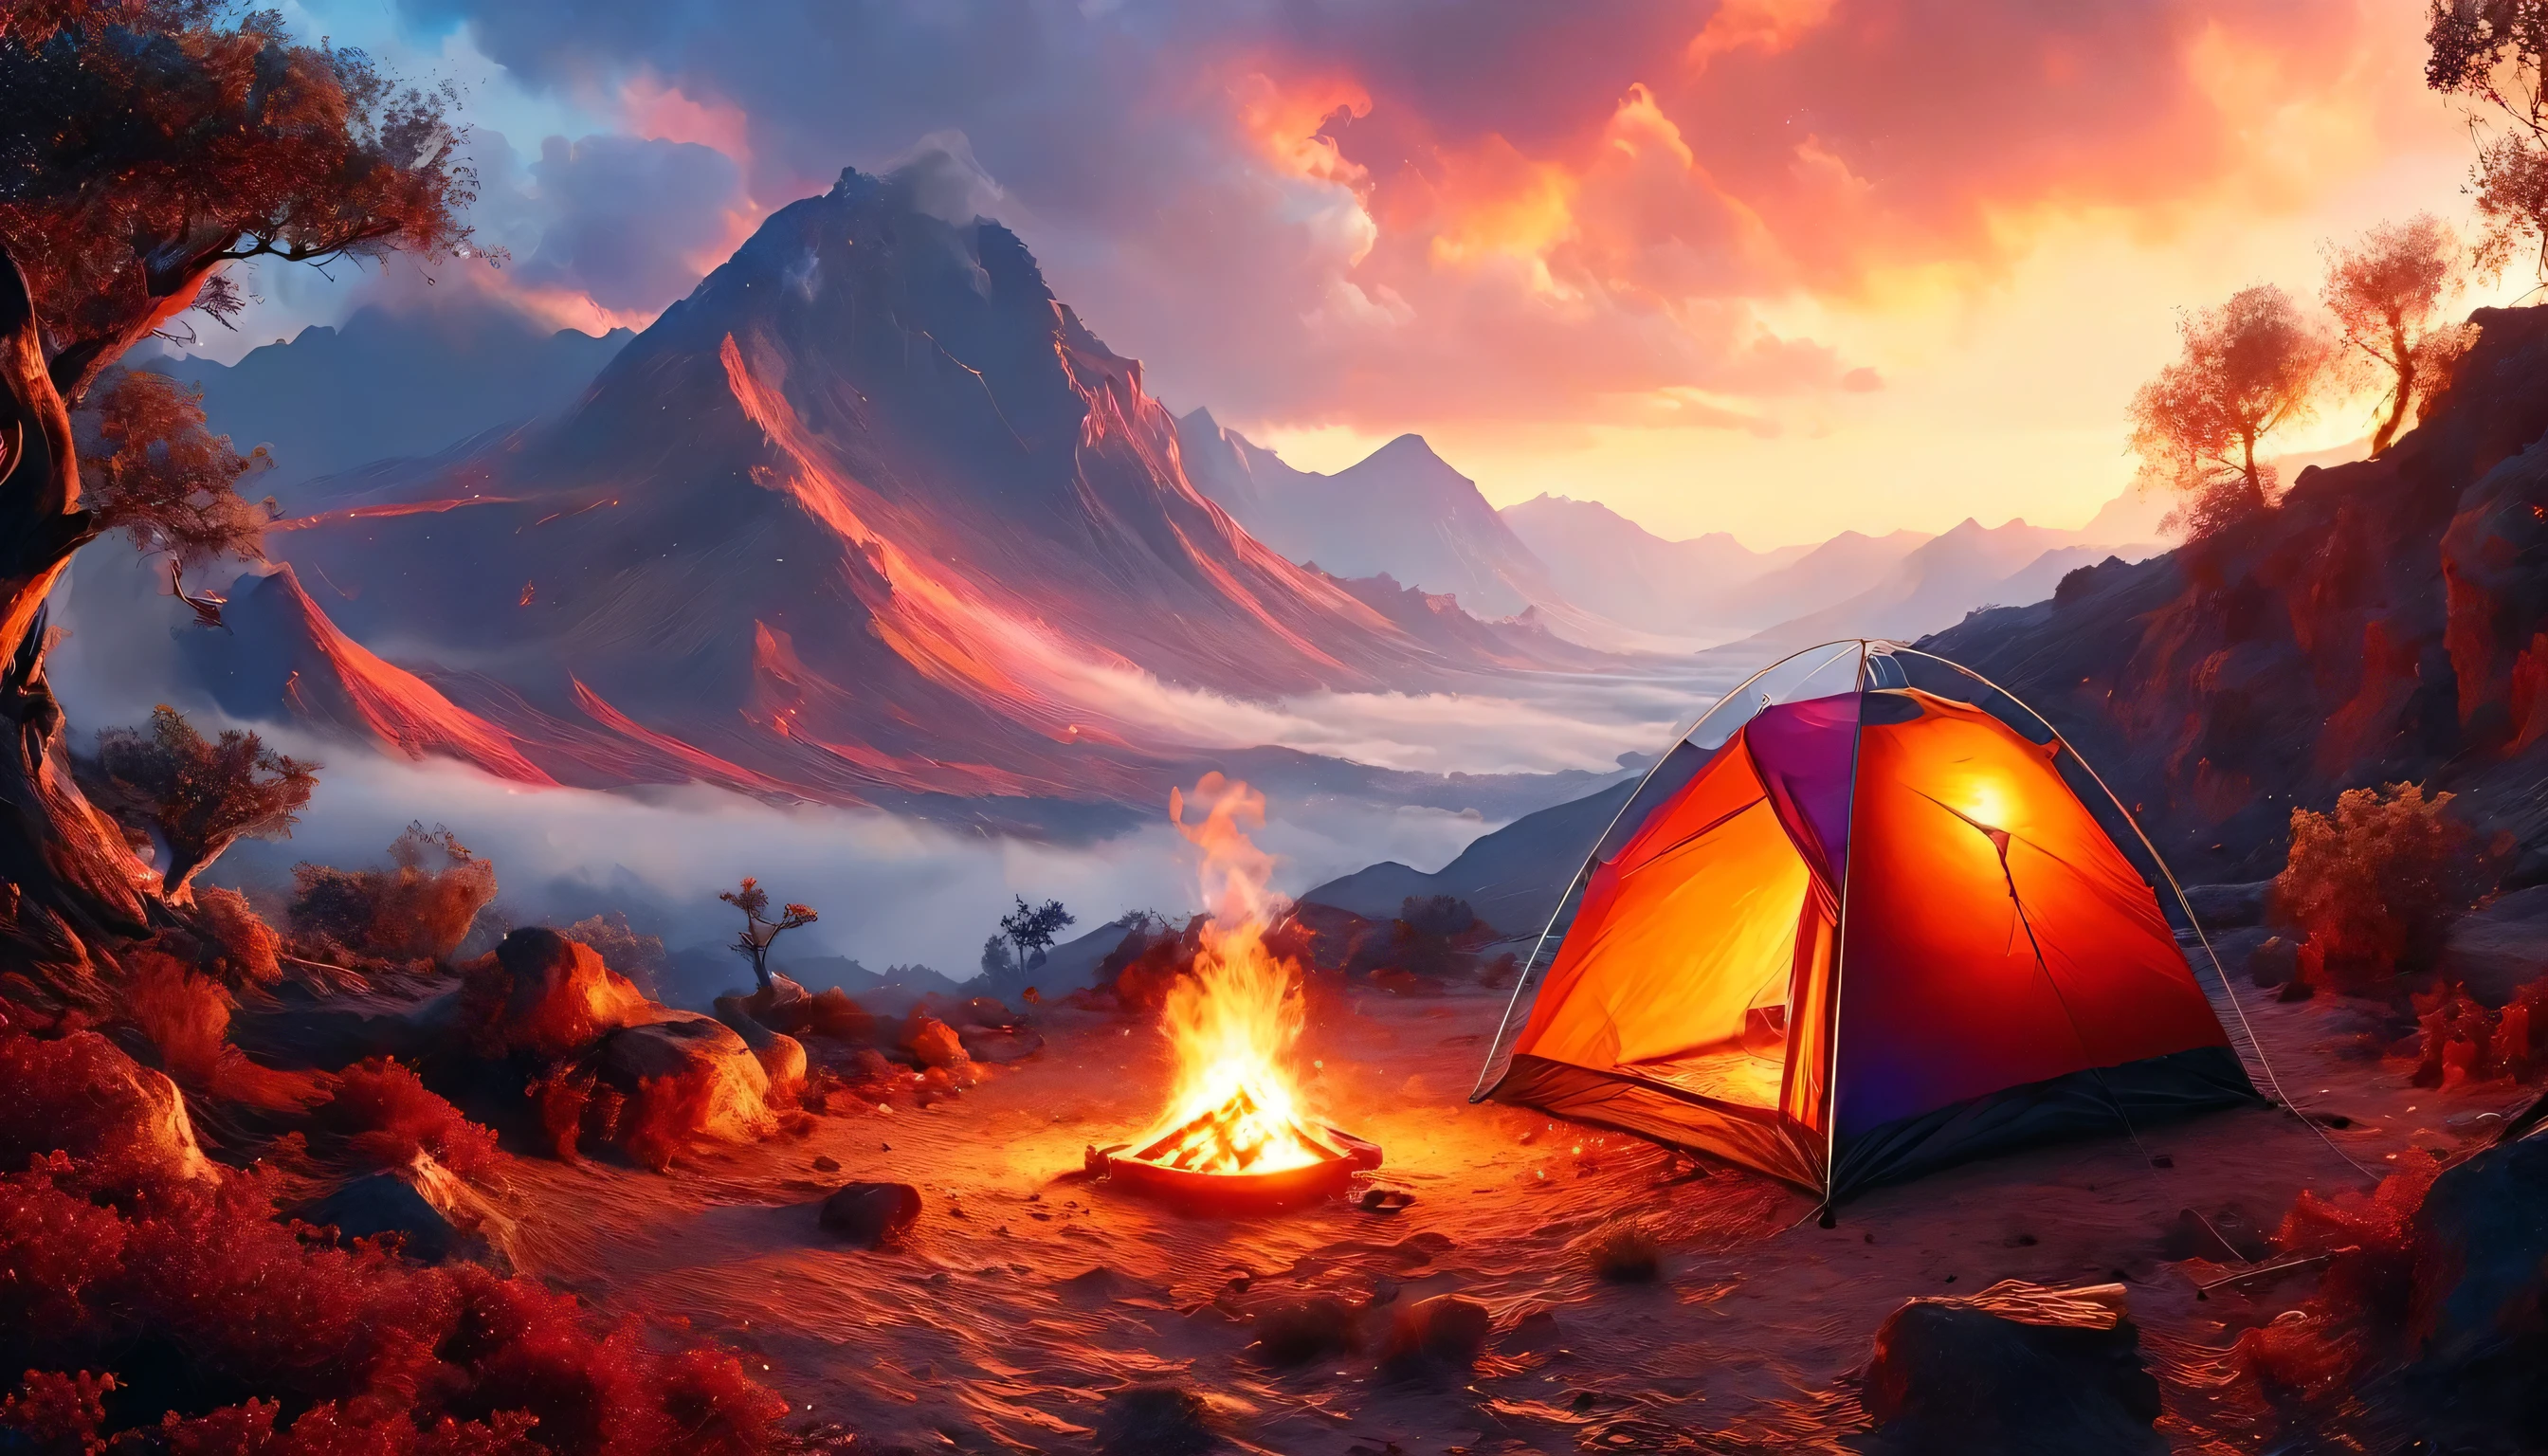 arafed, a picture of a camping (tent: 1.2) and small (campfire: 1.3) ((near)) the tent, on a desert mountaintop, its sunset the sky are in various shades of  (red: 1.1), (orange: 1.1), (azure: 1.1) (purple:1.1) there is smoke rising from the fire camp, there is a magnificent view of the desert canyon and ravines, there is sparce trees on the horizon, it is a time of serenity, peace, and relaxation, best quality, 16K,  photorealism, National Geographic award winning photoshoot, ultra wide shot, RagingNebula, ladyshadow